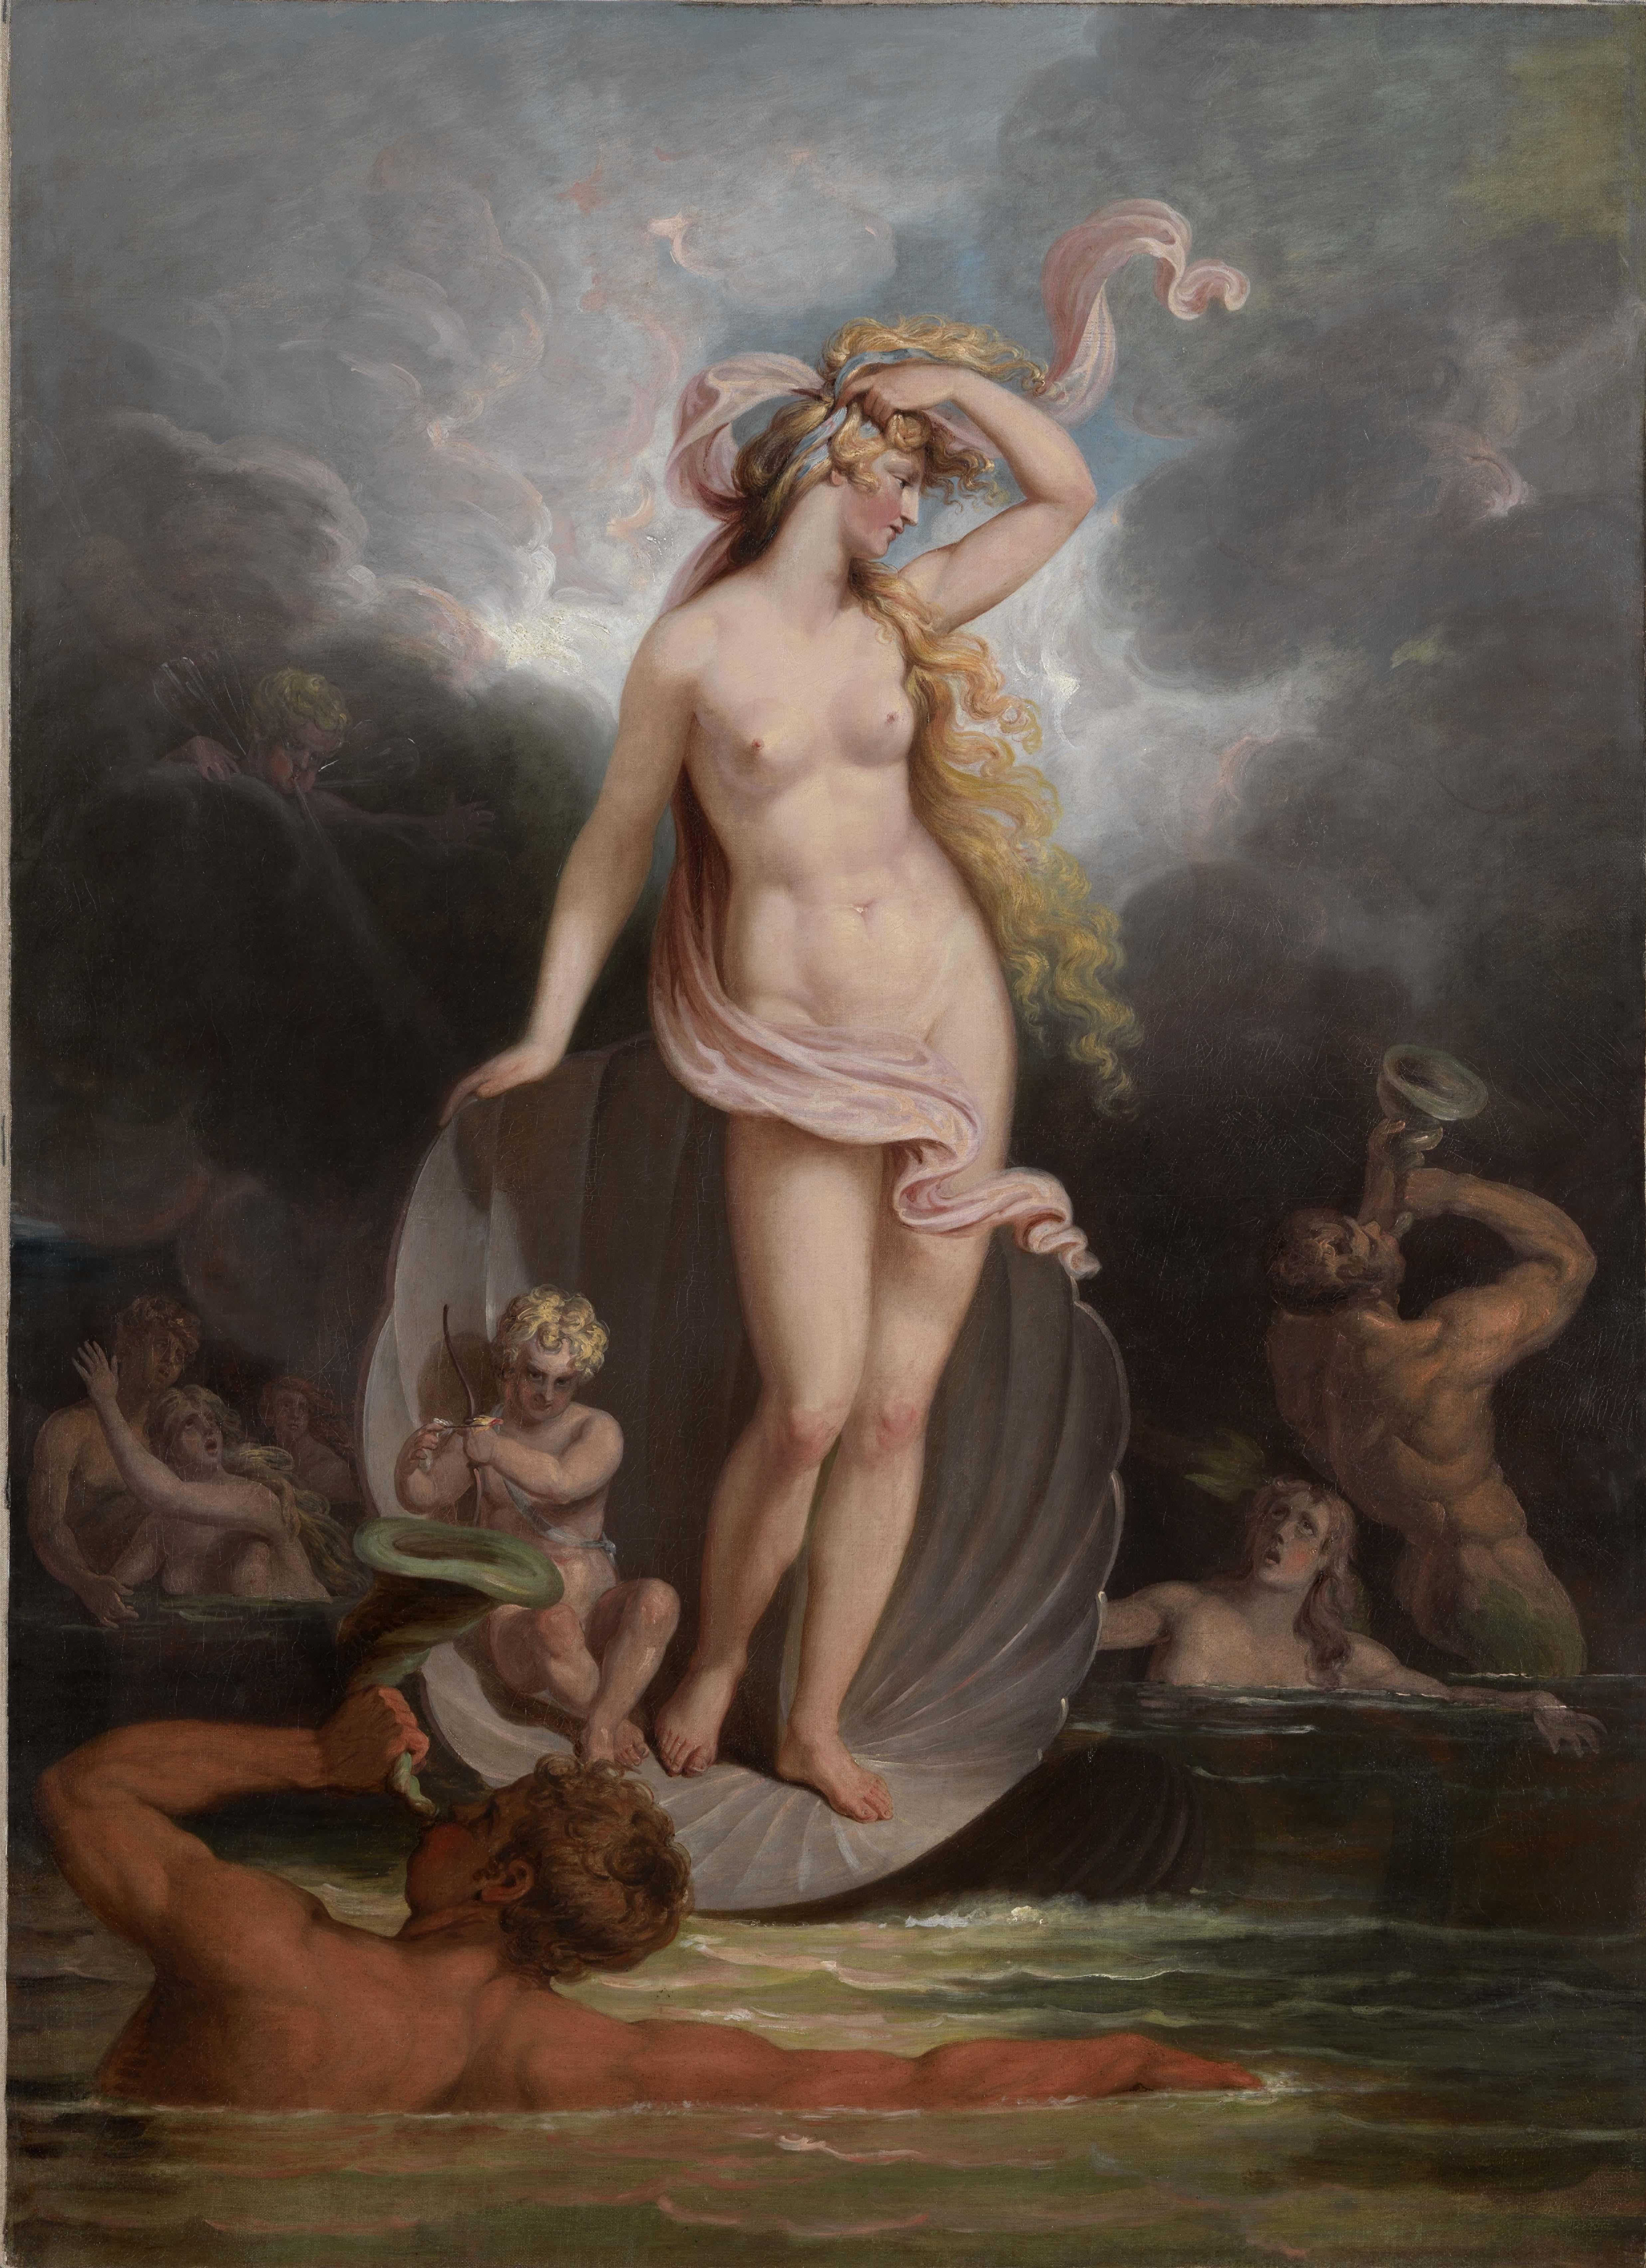 18th century allegorical painting of The Triumph of Beauty - Painting by Edward Dayes